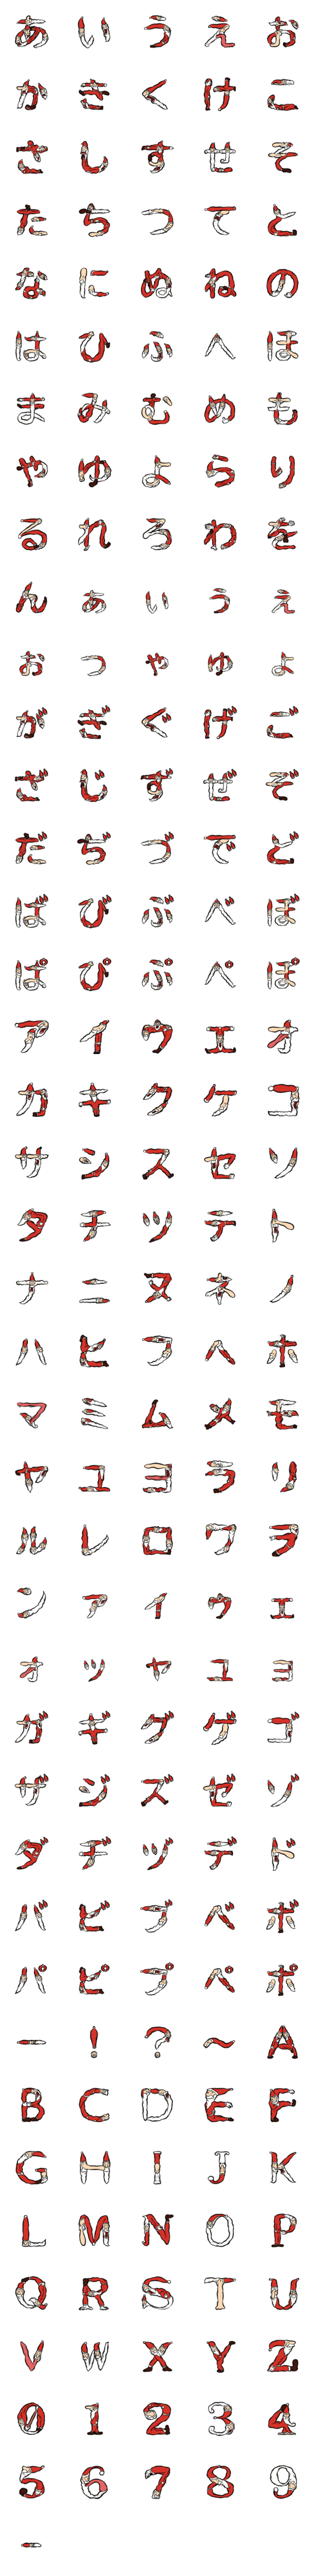 [LINE絵文字]サンタが体を張ったデコ文字の画像一覧